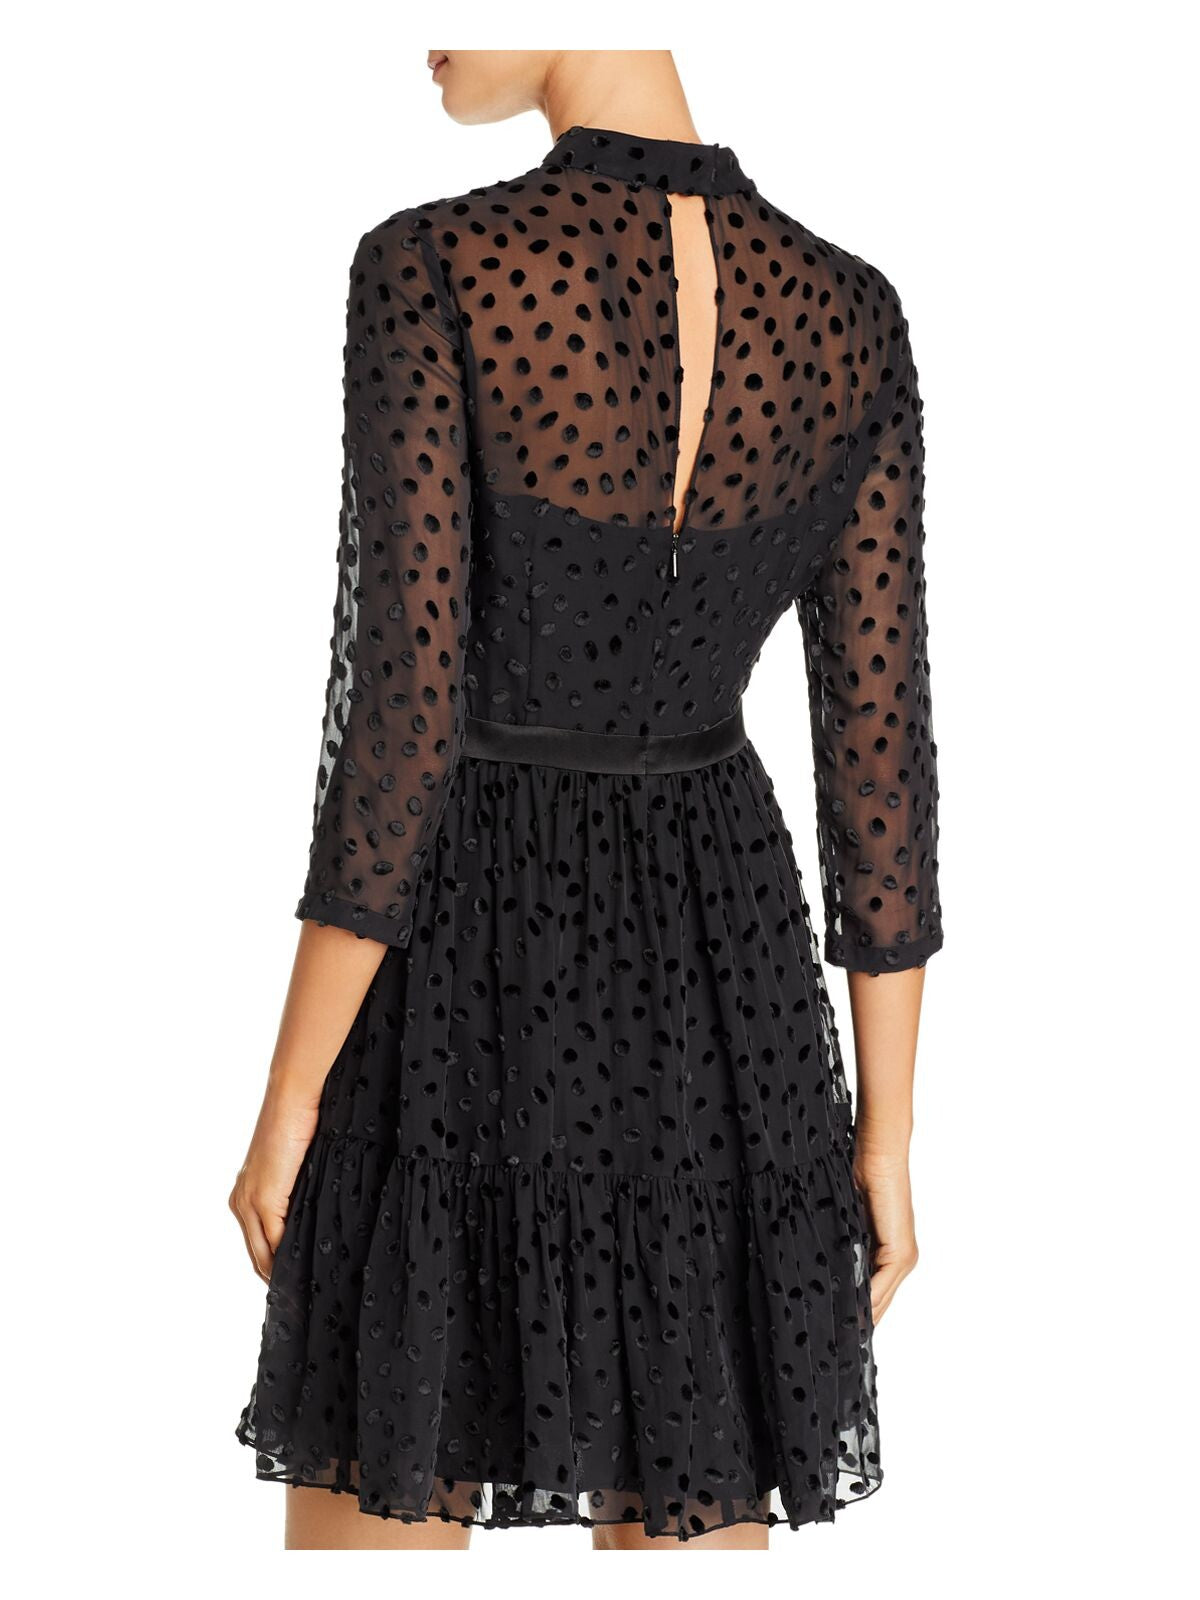 REBECCA TAYLOR Womens Black Zippered Cut Out Partially Lined Sheer Ruffled Polka Dot 3/4 Sleeve Mock Neck Above The Knee Fit + Flare Dress 10